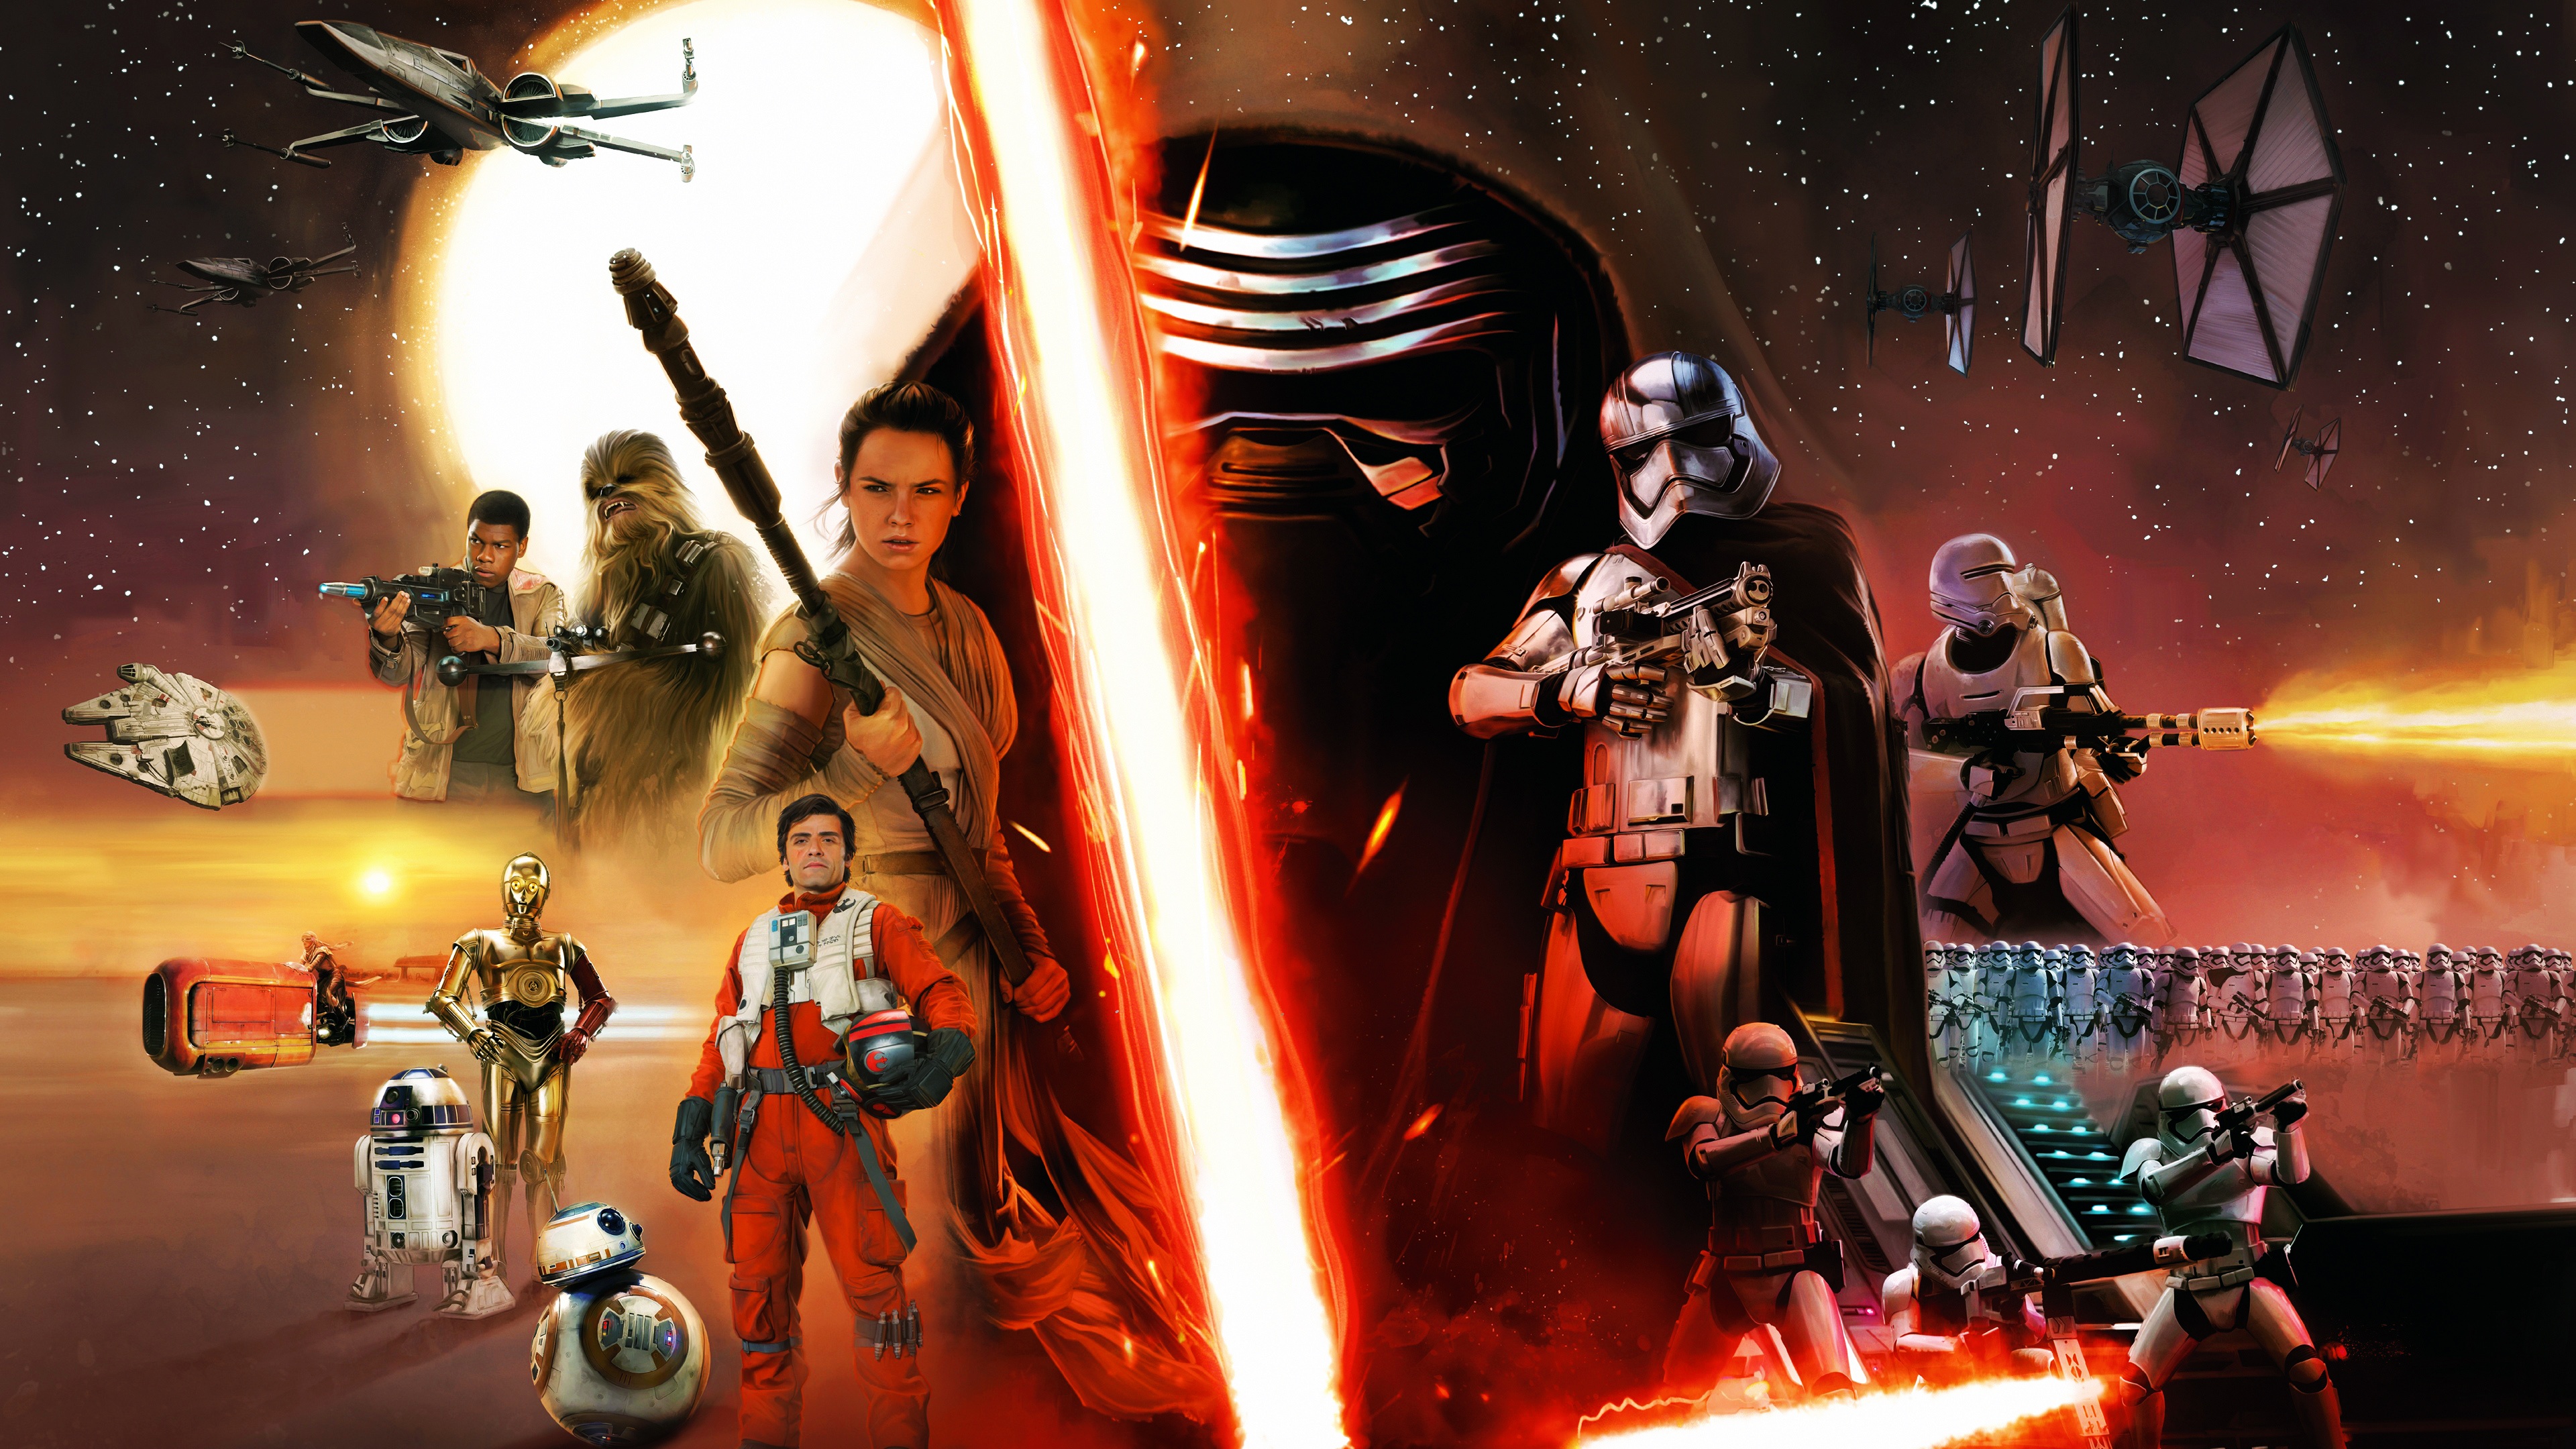  Wars Episode VII The Force Awakens Concept Wallpapers HD Wallpapers 3840x2160